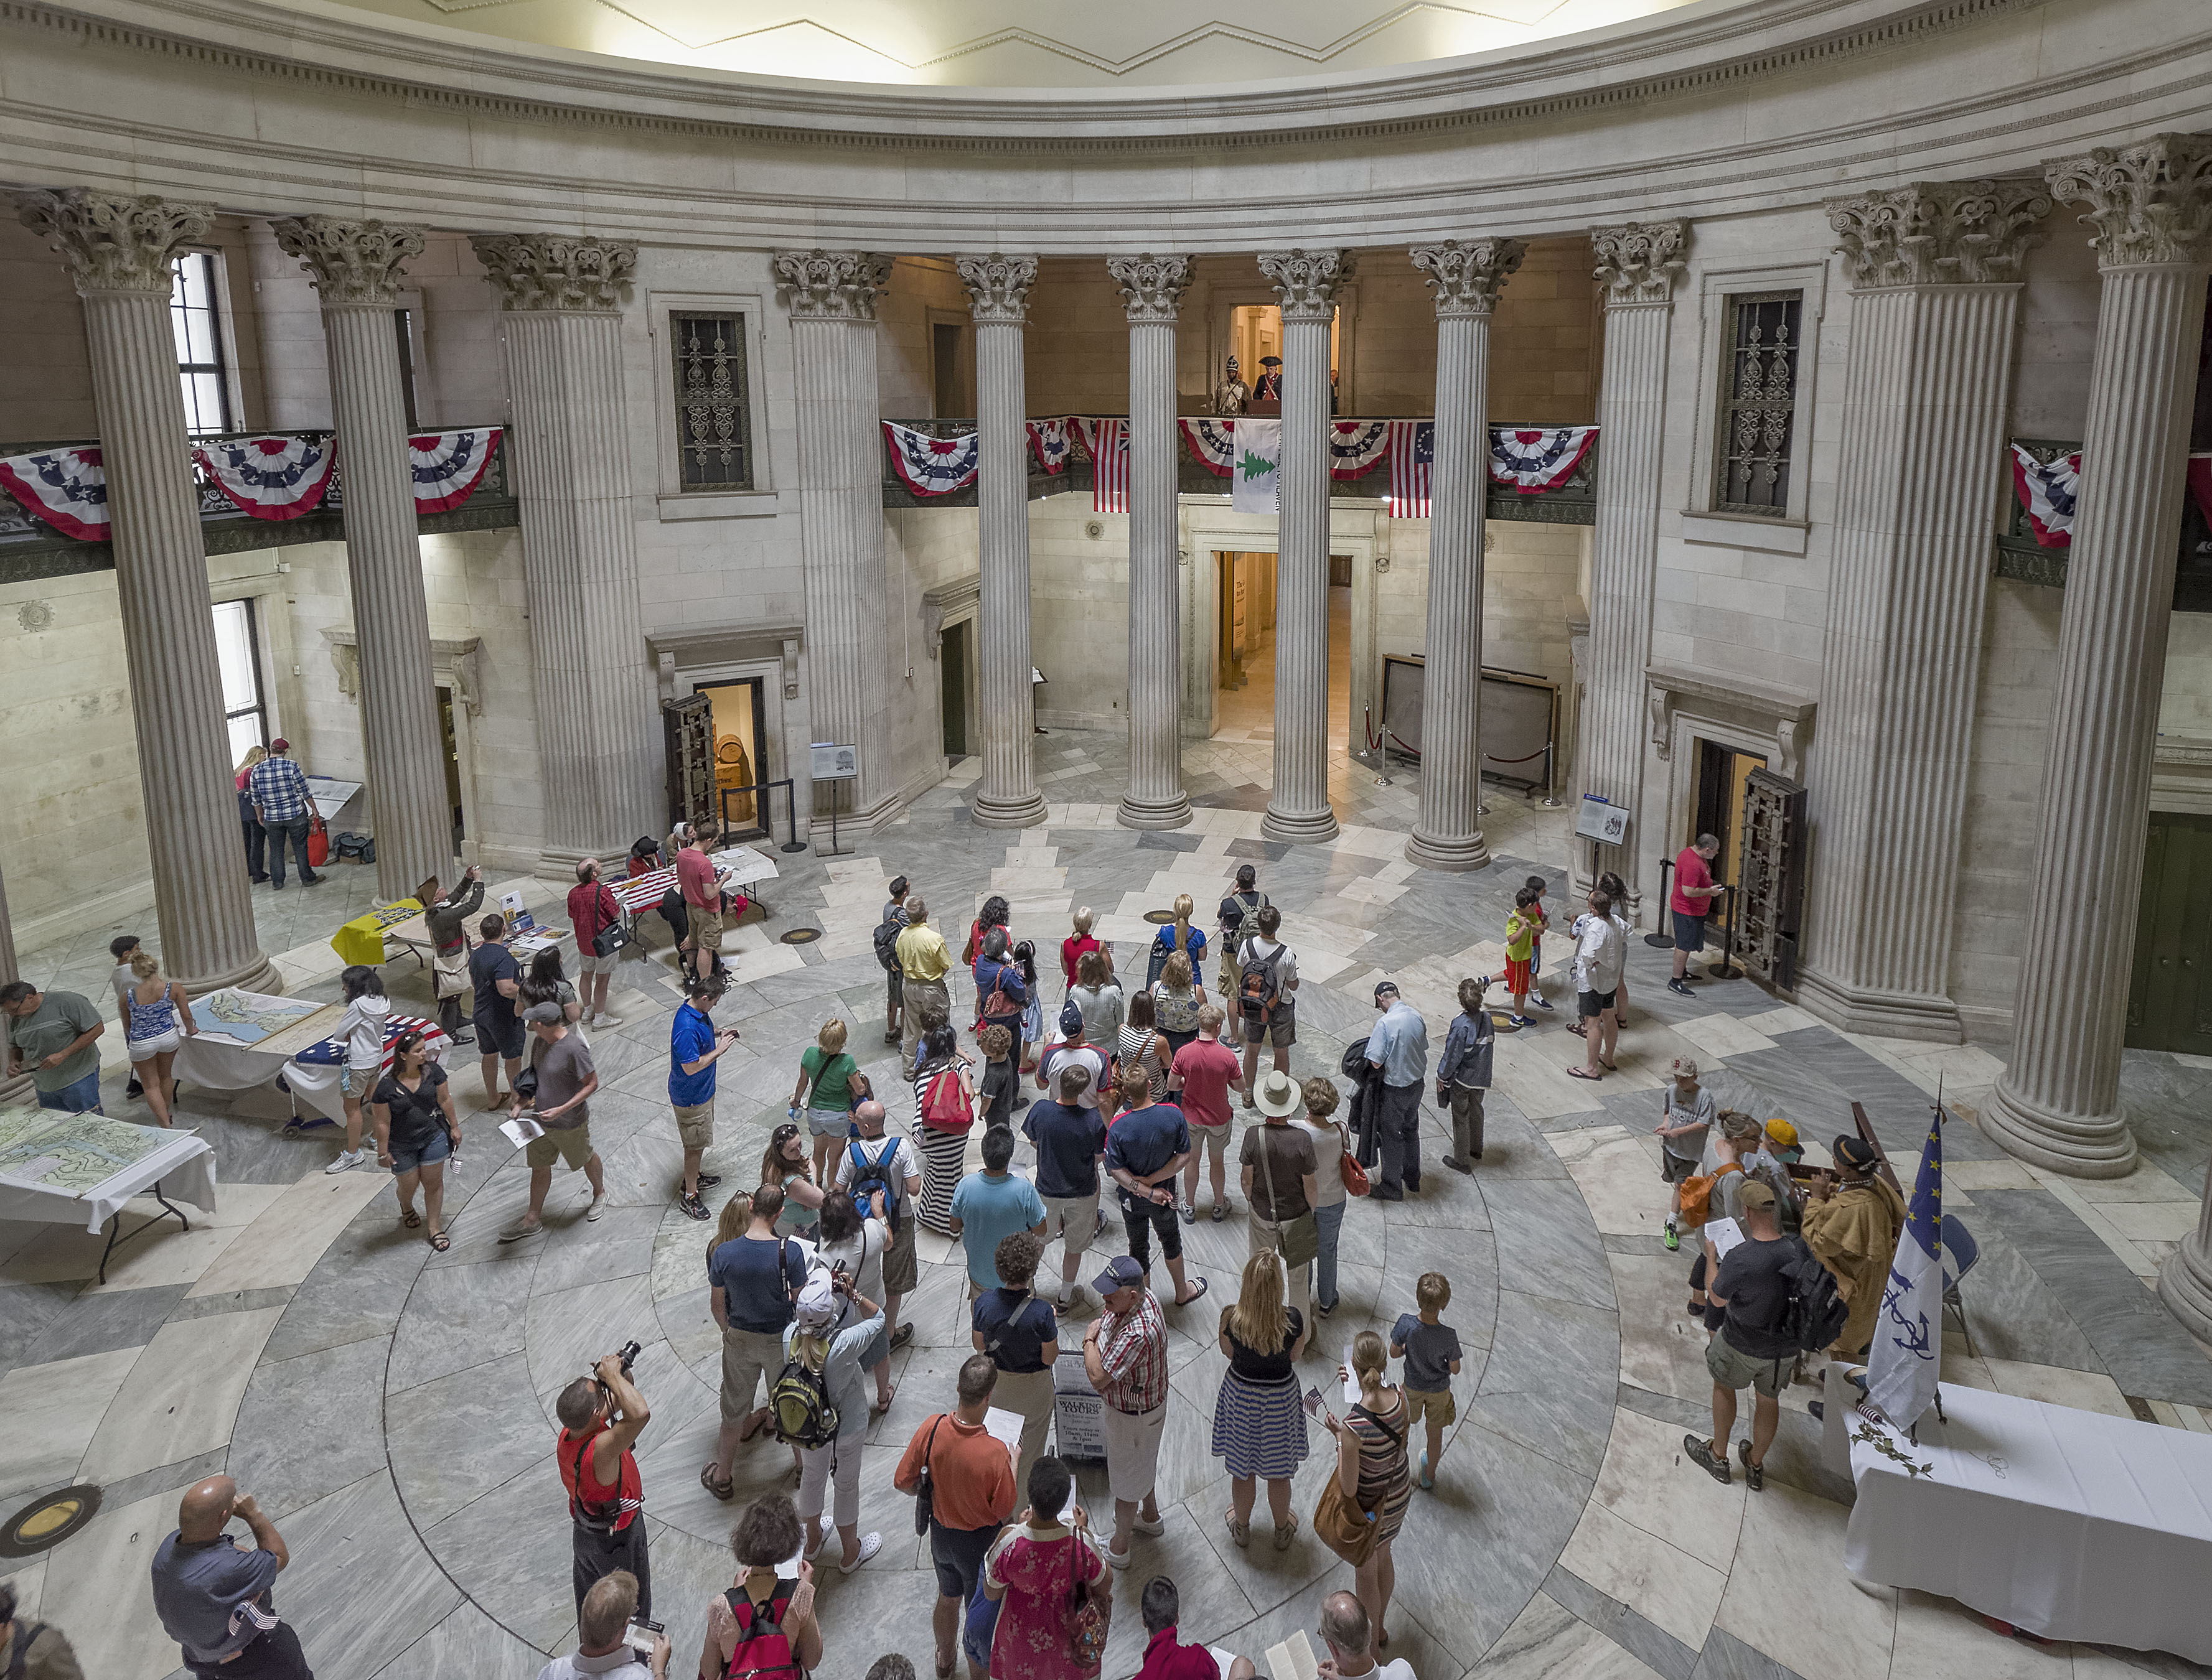 “Large crowd inside the rotunda of Federal Hall National Memorial”